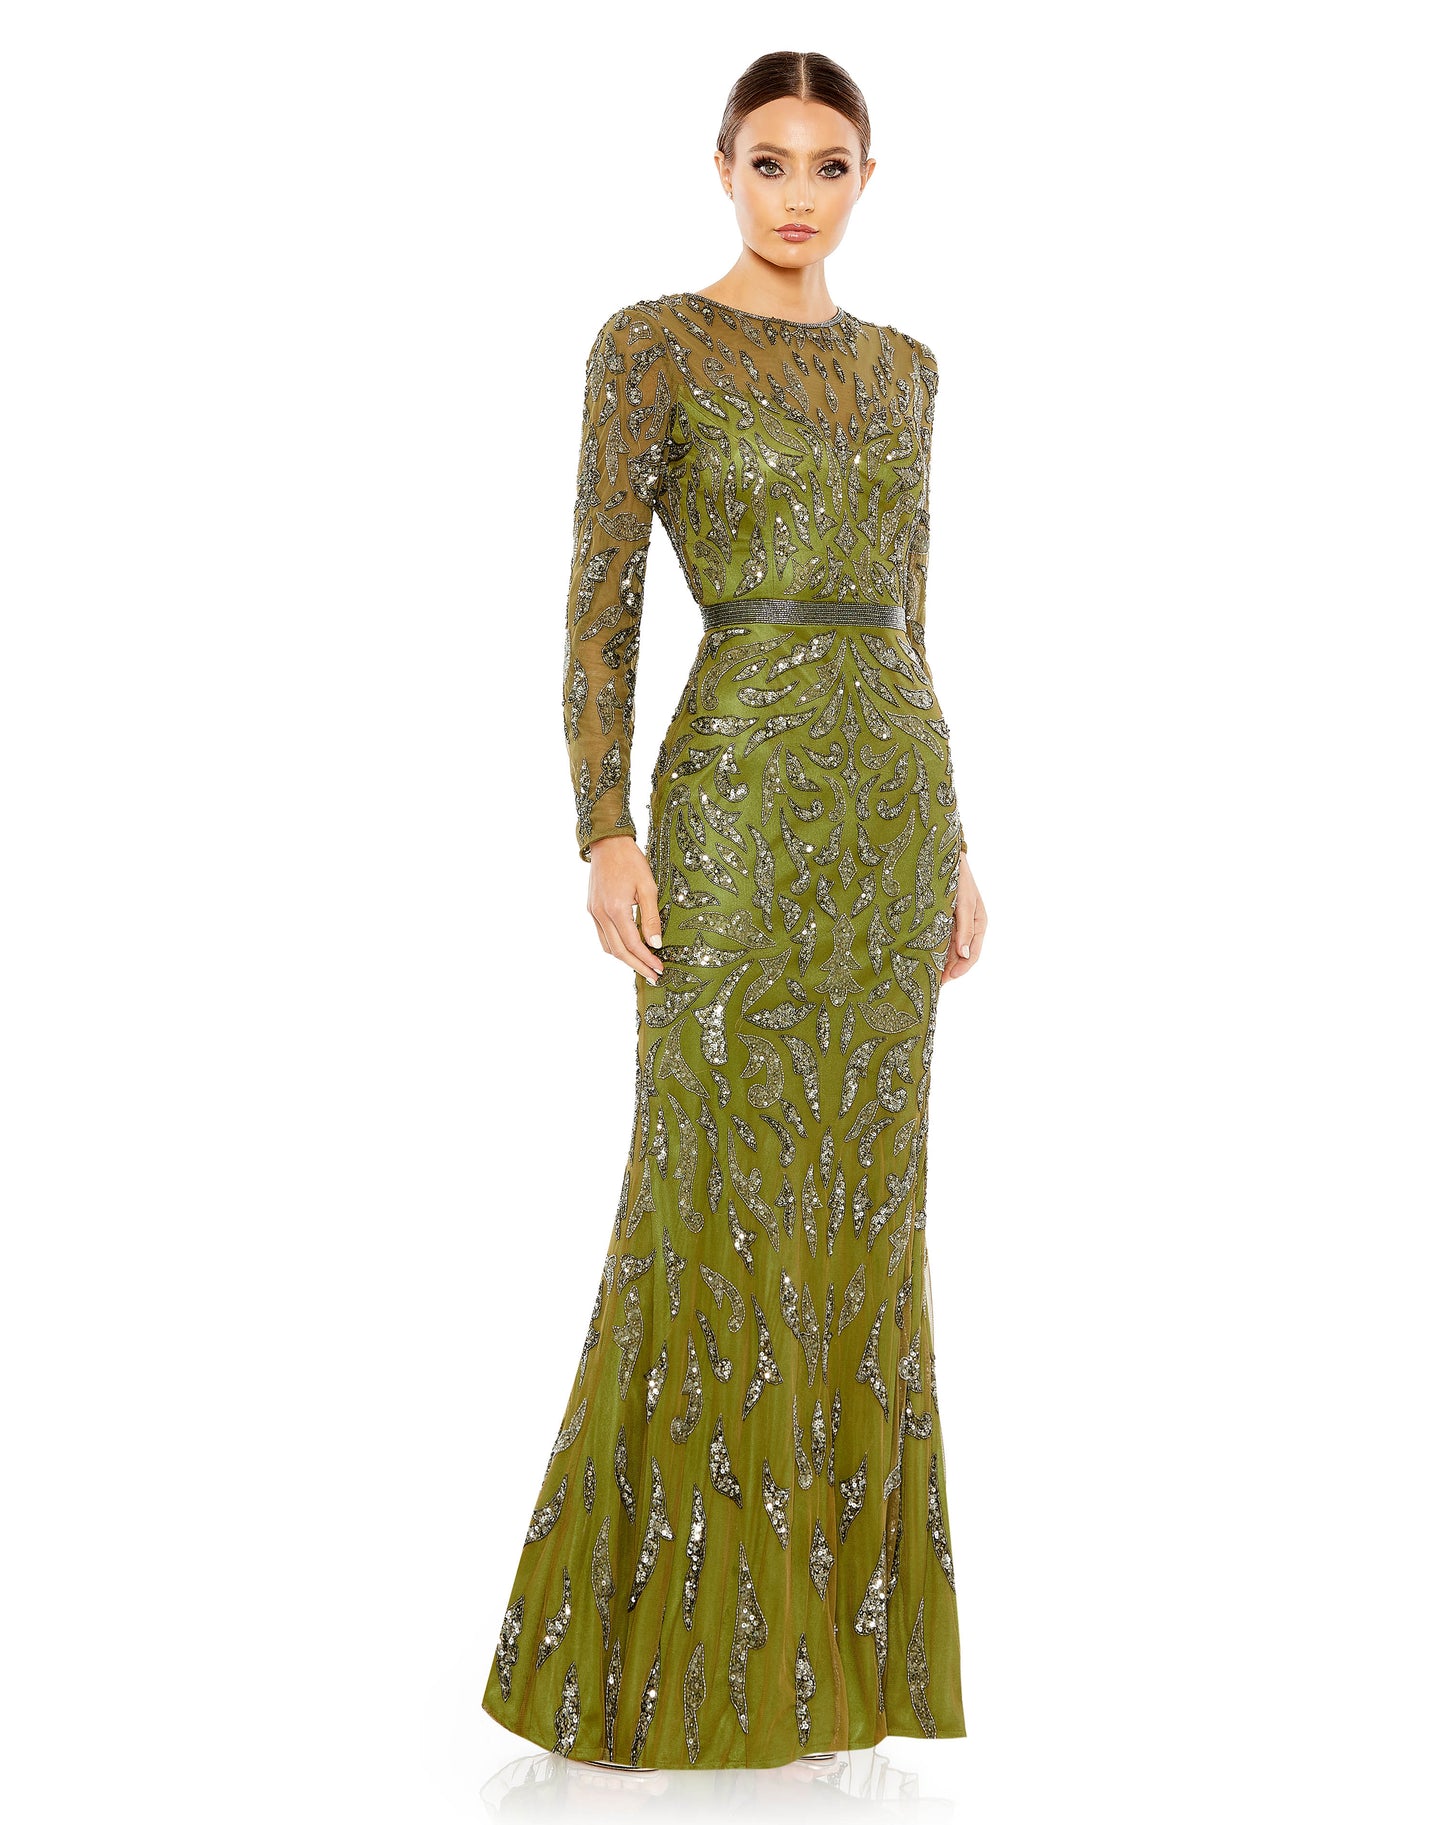 Fully-embellished long sleeve evening gown adorned with beads and sequins placed in an abstract pattern. Mac Duggal Back Zipper 100% Polyester Long Sleeve Floor Length High Neck Style #5124 Contact us to find out if we have your size Ready-to-Ship!